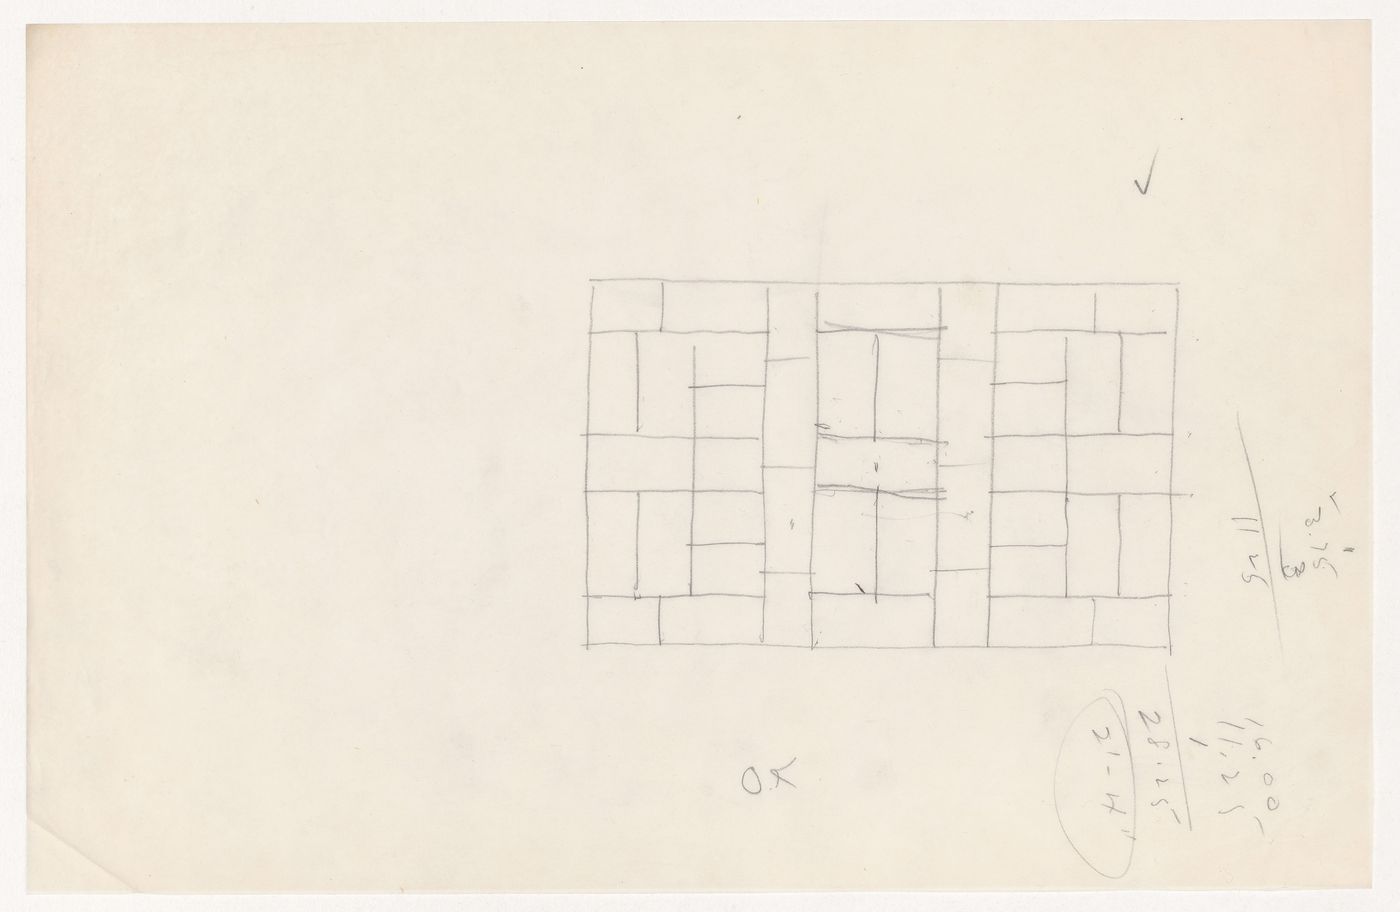 Sketch section for brick coursing for the Metallurgy Building, Illinois Institute of Technology, Chicago